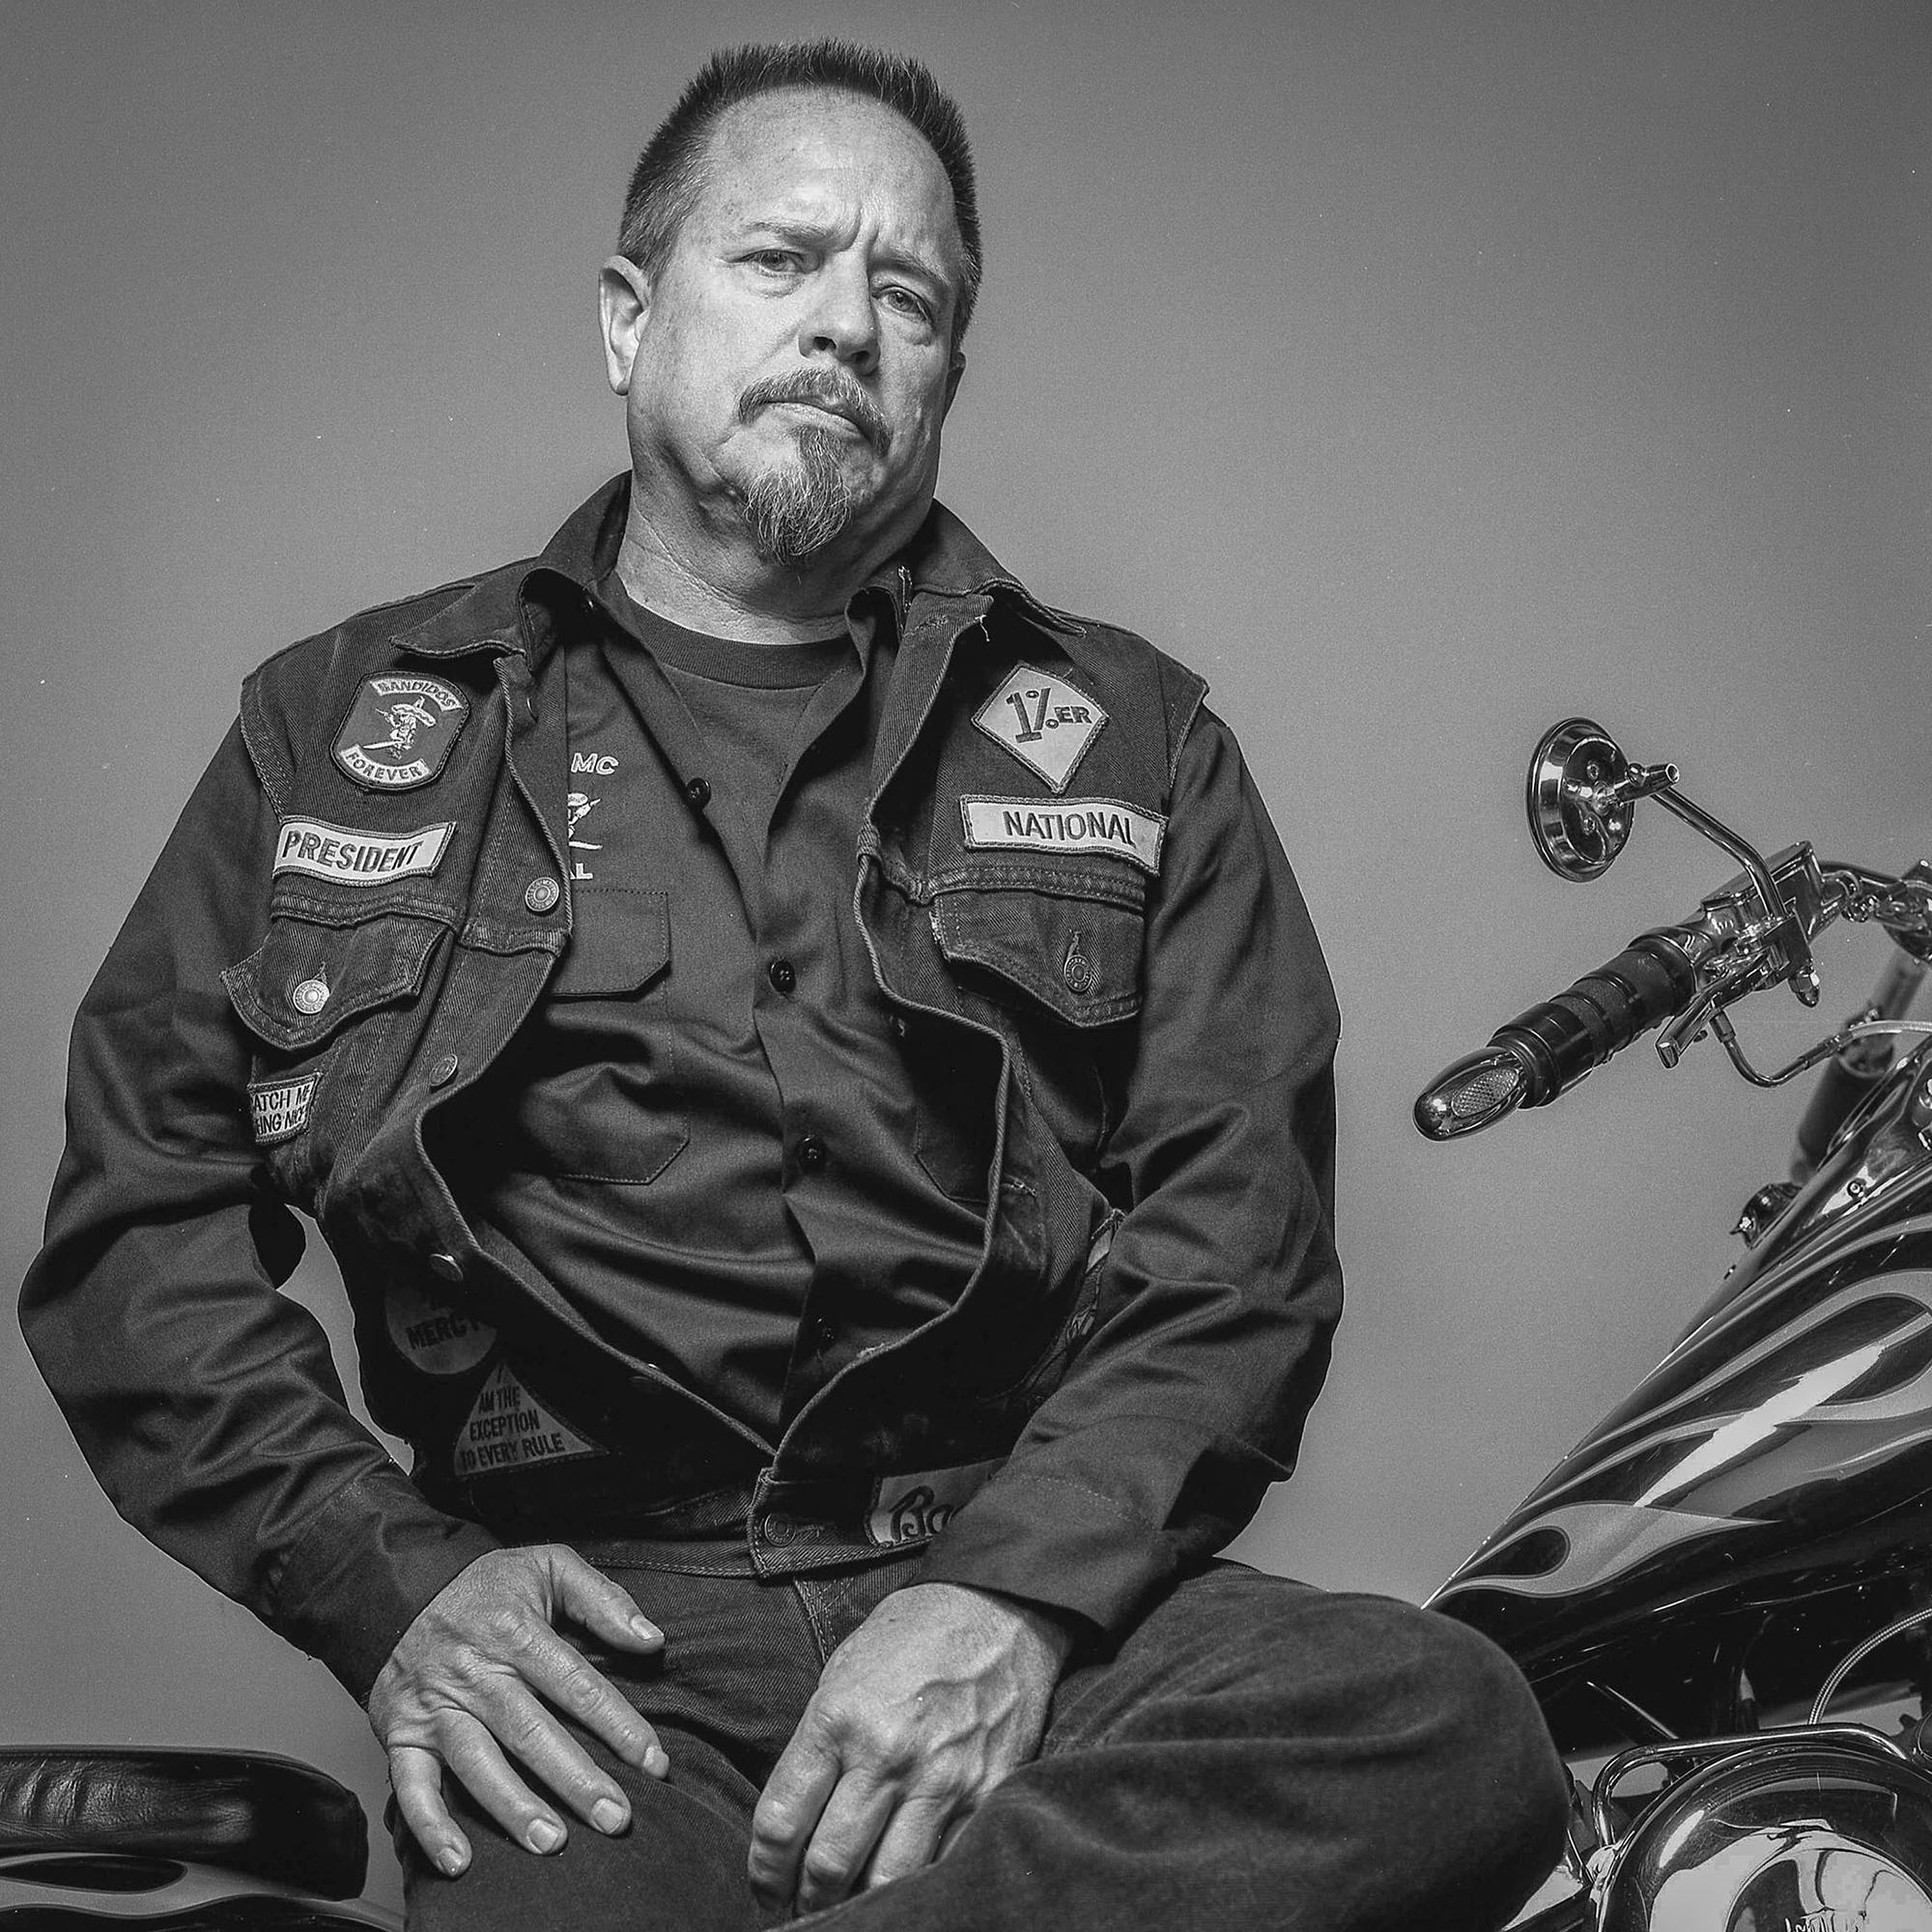 Jeff Pike, president of the Bandidos, on his motorcycle. 